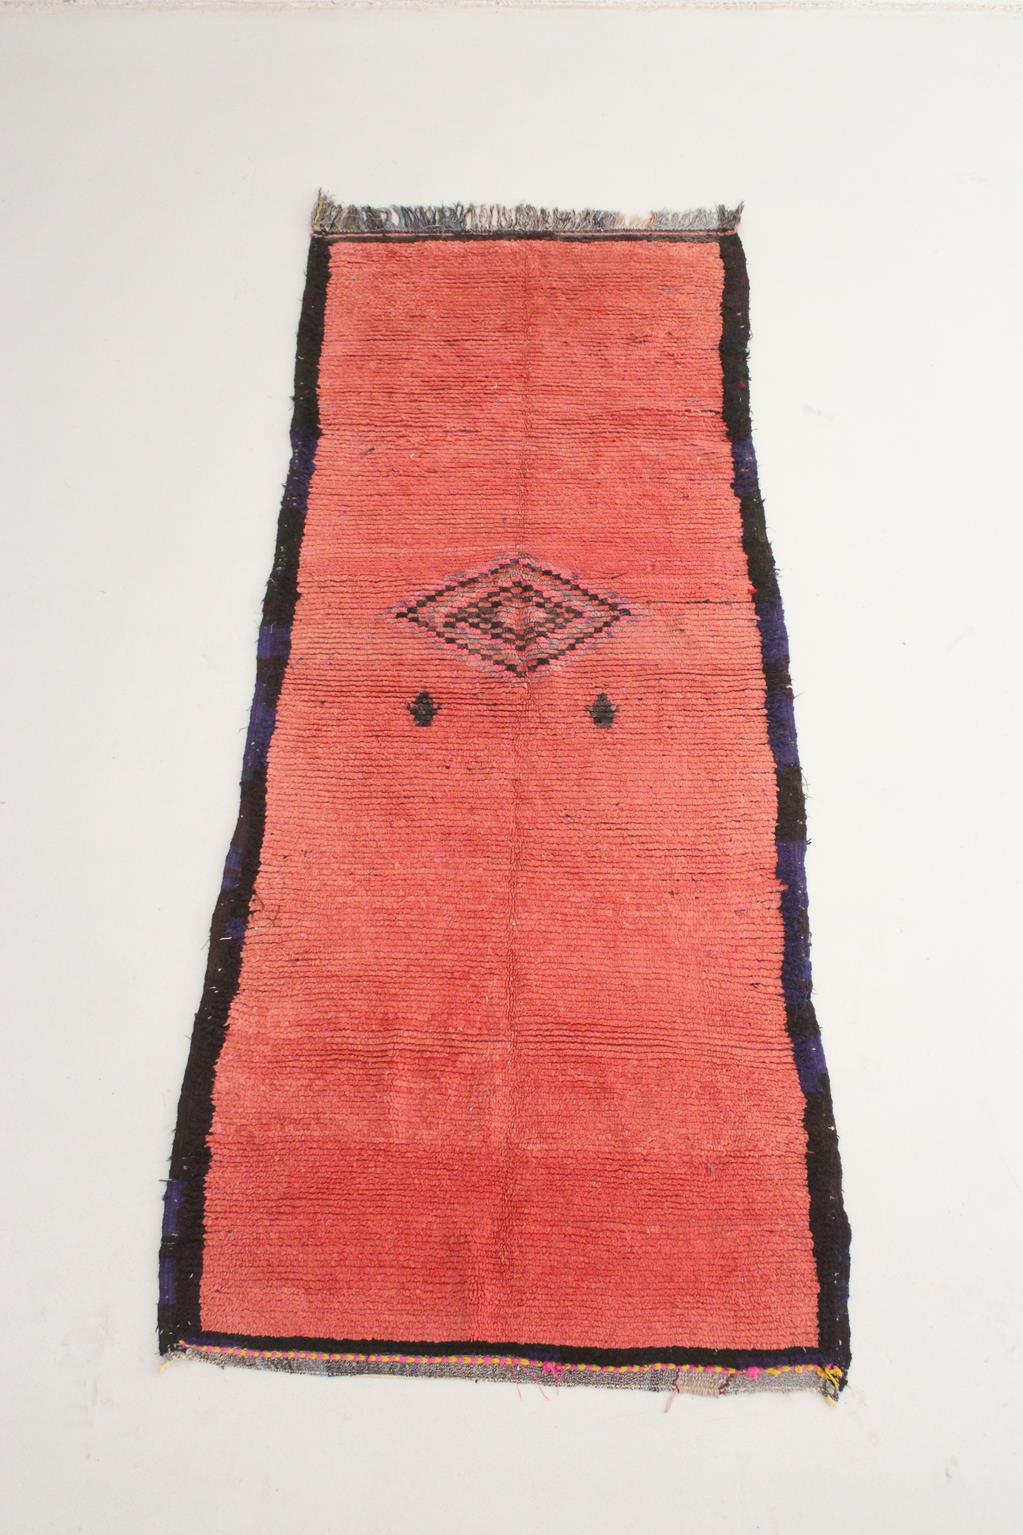 This vintage runner rug brings such a calm vibe. Probably made in the area of Boujad, Middle Atlas, Morocco, the rug is very simple as it is mostly a rich pink/raspberry background with a black and purple frame. Only one small diamond in the center,